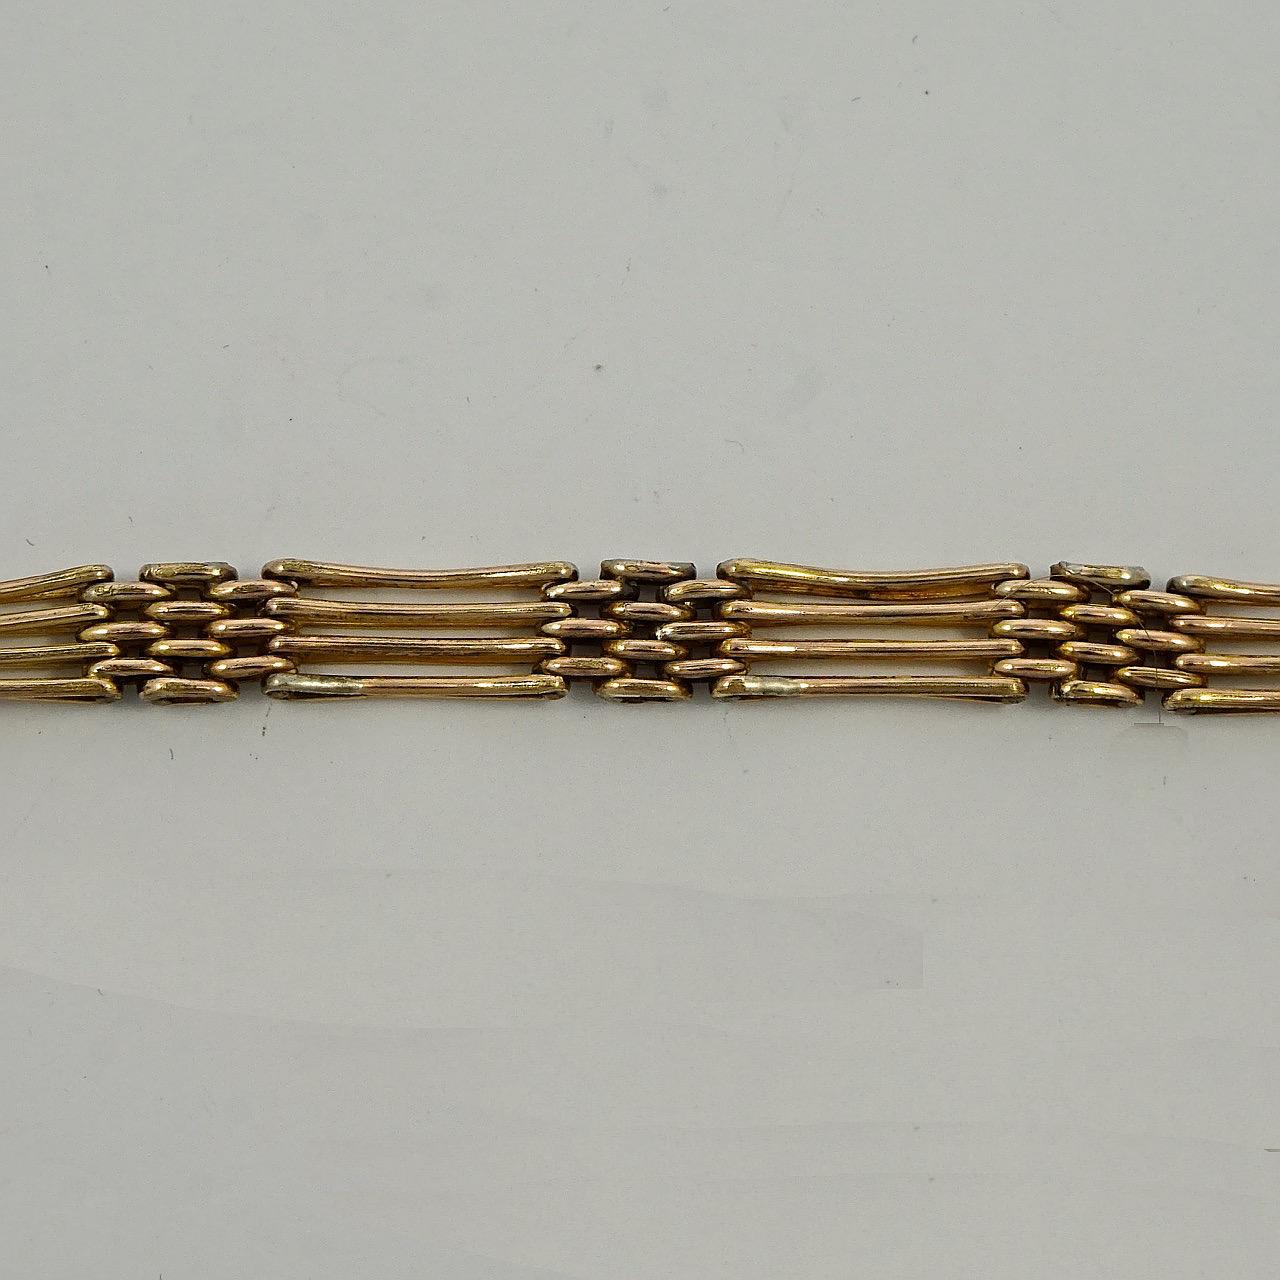 Lovely antique rolled rose gold gate link bracelet with a safety chain, featuring curved four bar links and a heart clasp. Measuring length 20.3cm / 8 inches by width 6.5mm / .25 inch. The bracelet has wear to the gold, and the heart has scratching.